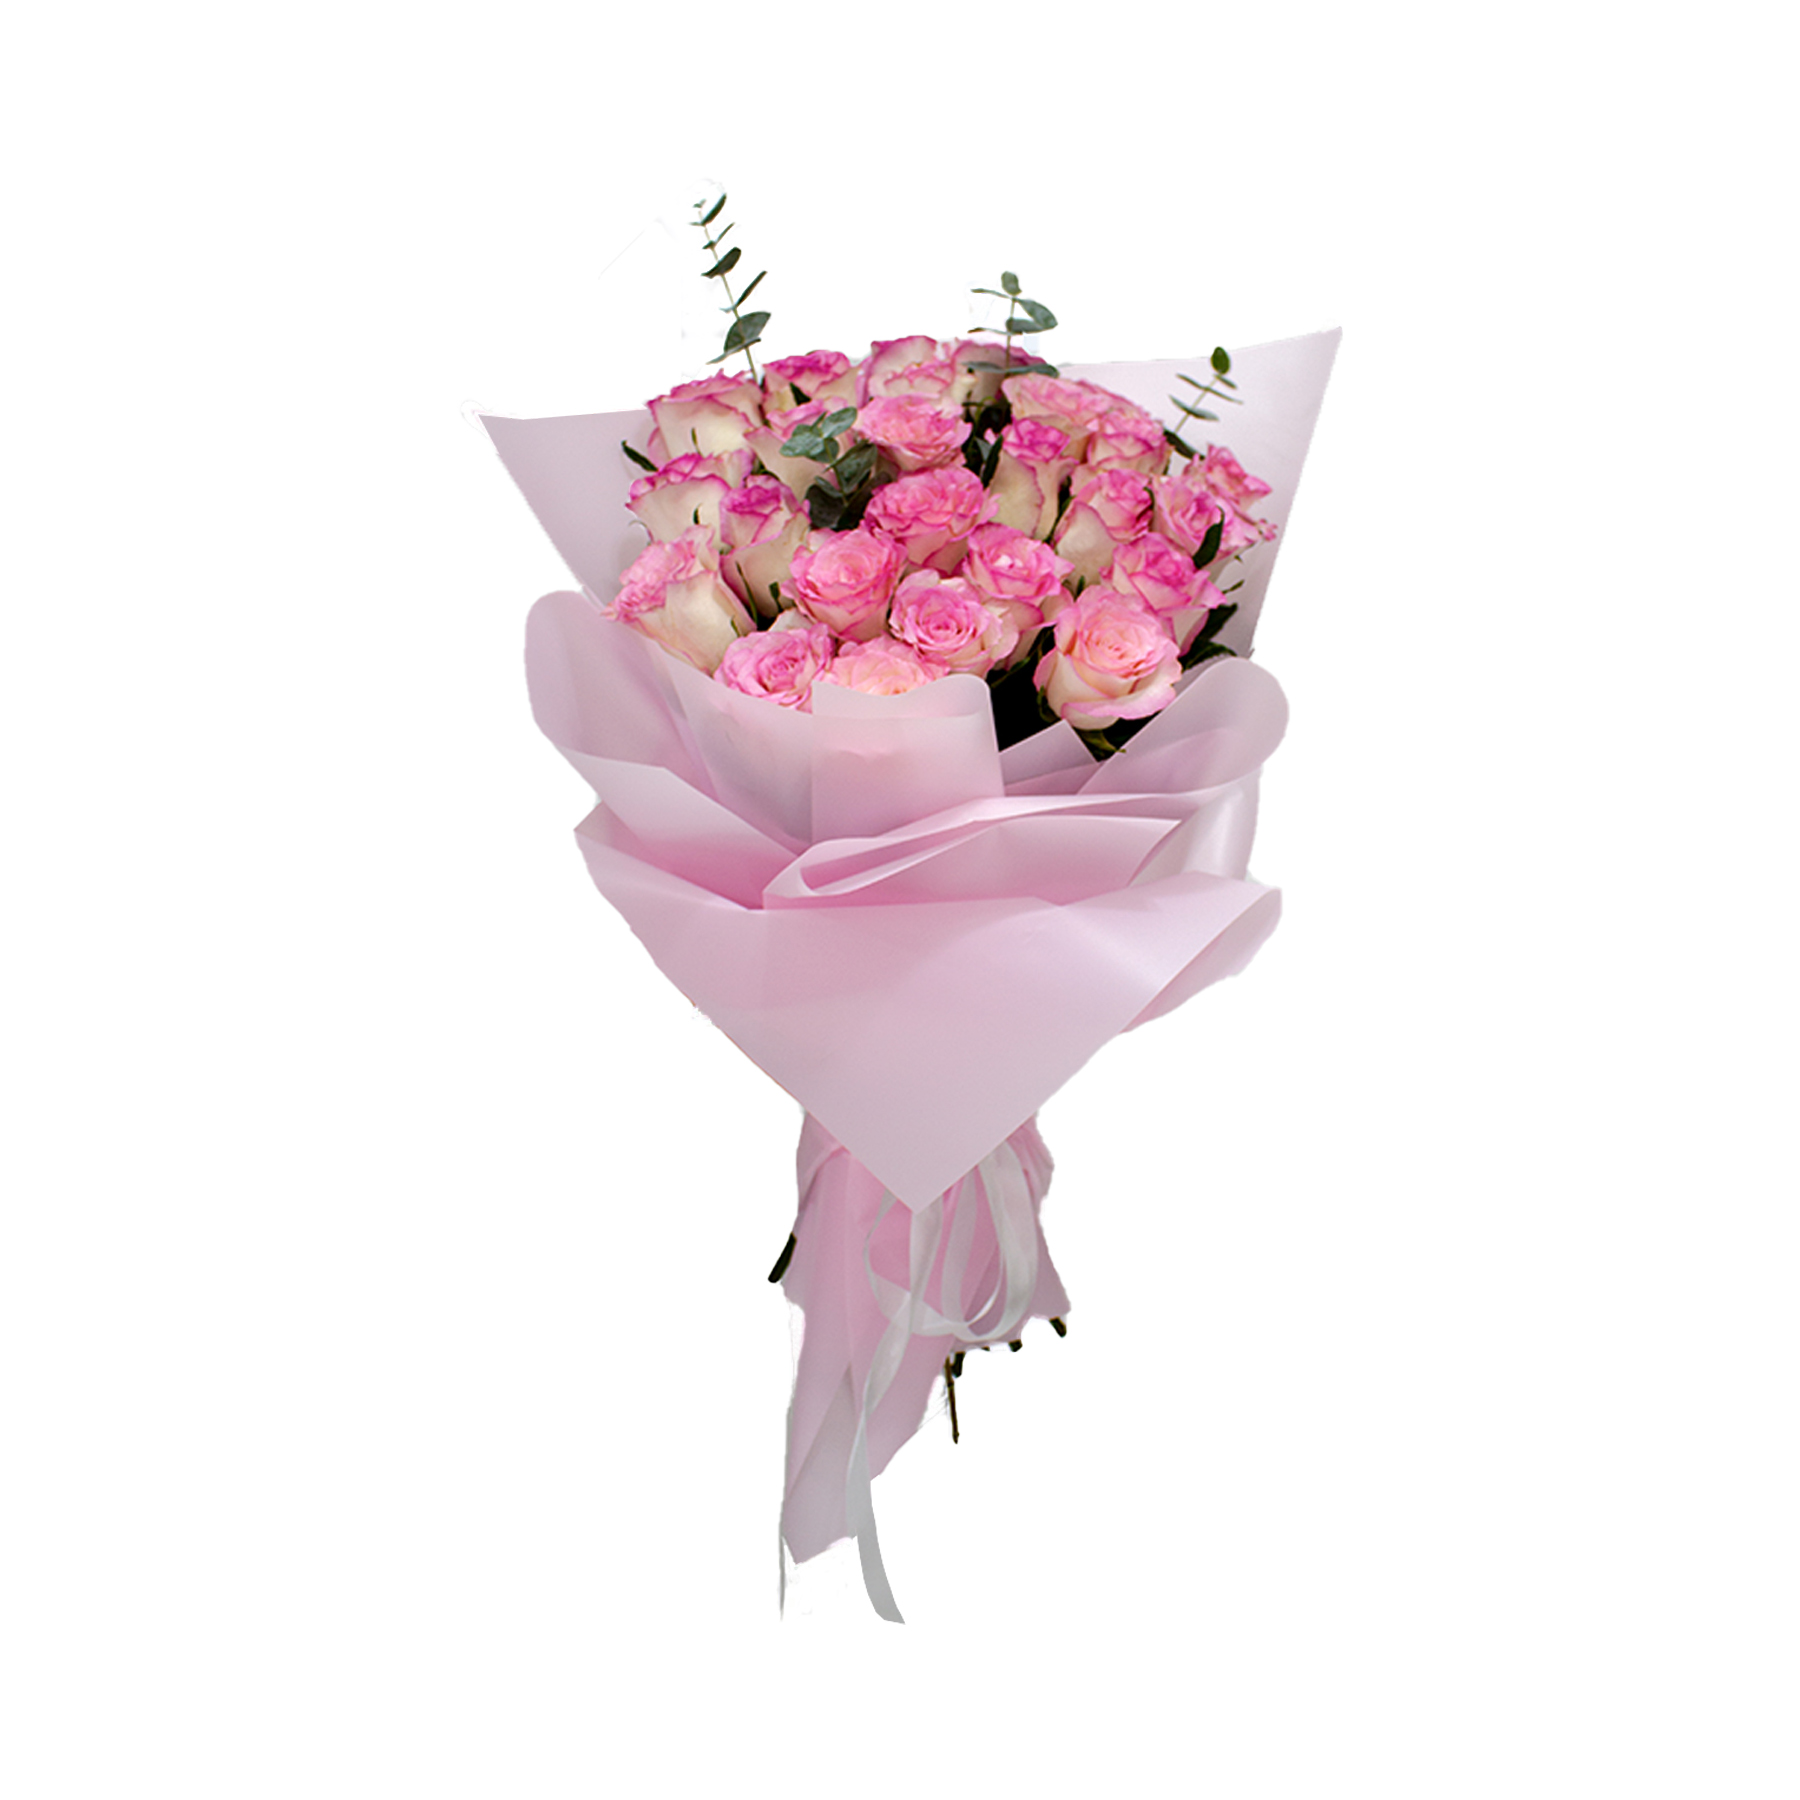 roses-of-mix-color-pink-and-white1